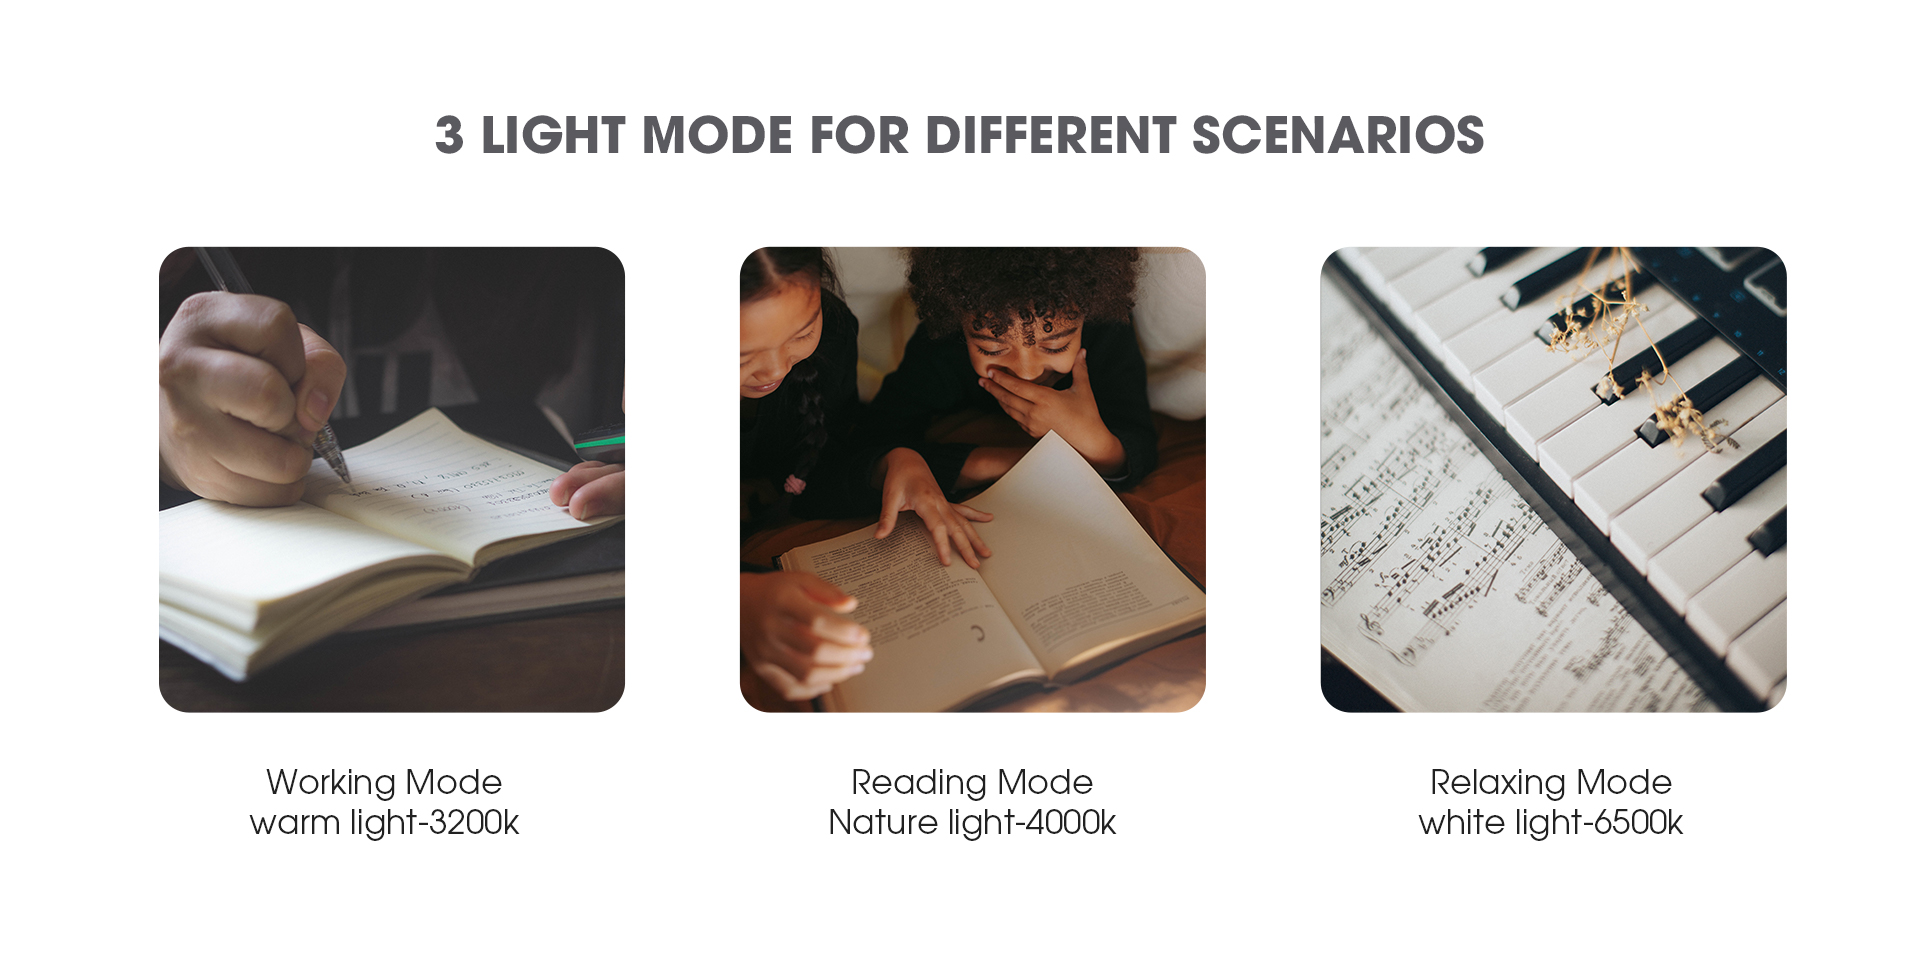 3 light mode for different scenarios.Work,read,relax